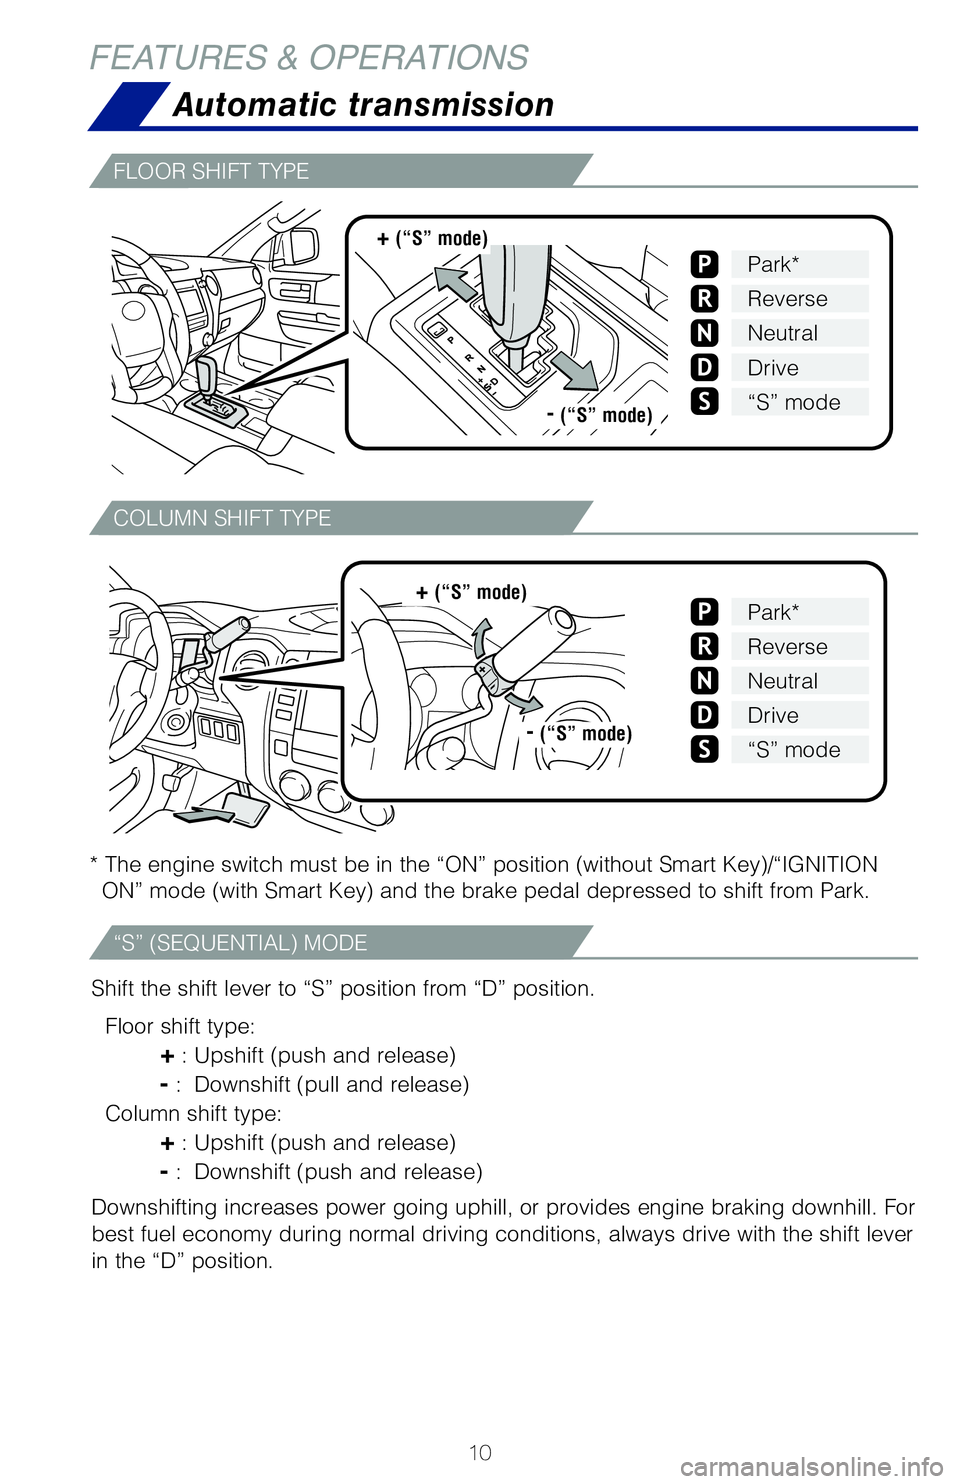 TOYOTA TUNDRA 2020   (in English) User Guide 10
FEATURES & OPERATIONS
Shift the shift lever to “S” position from “D” position.
Floor shift type: 
 + : Upshift (push and release)
 - : Downshift (pull and release)
Column shift type:
 + : U